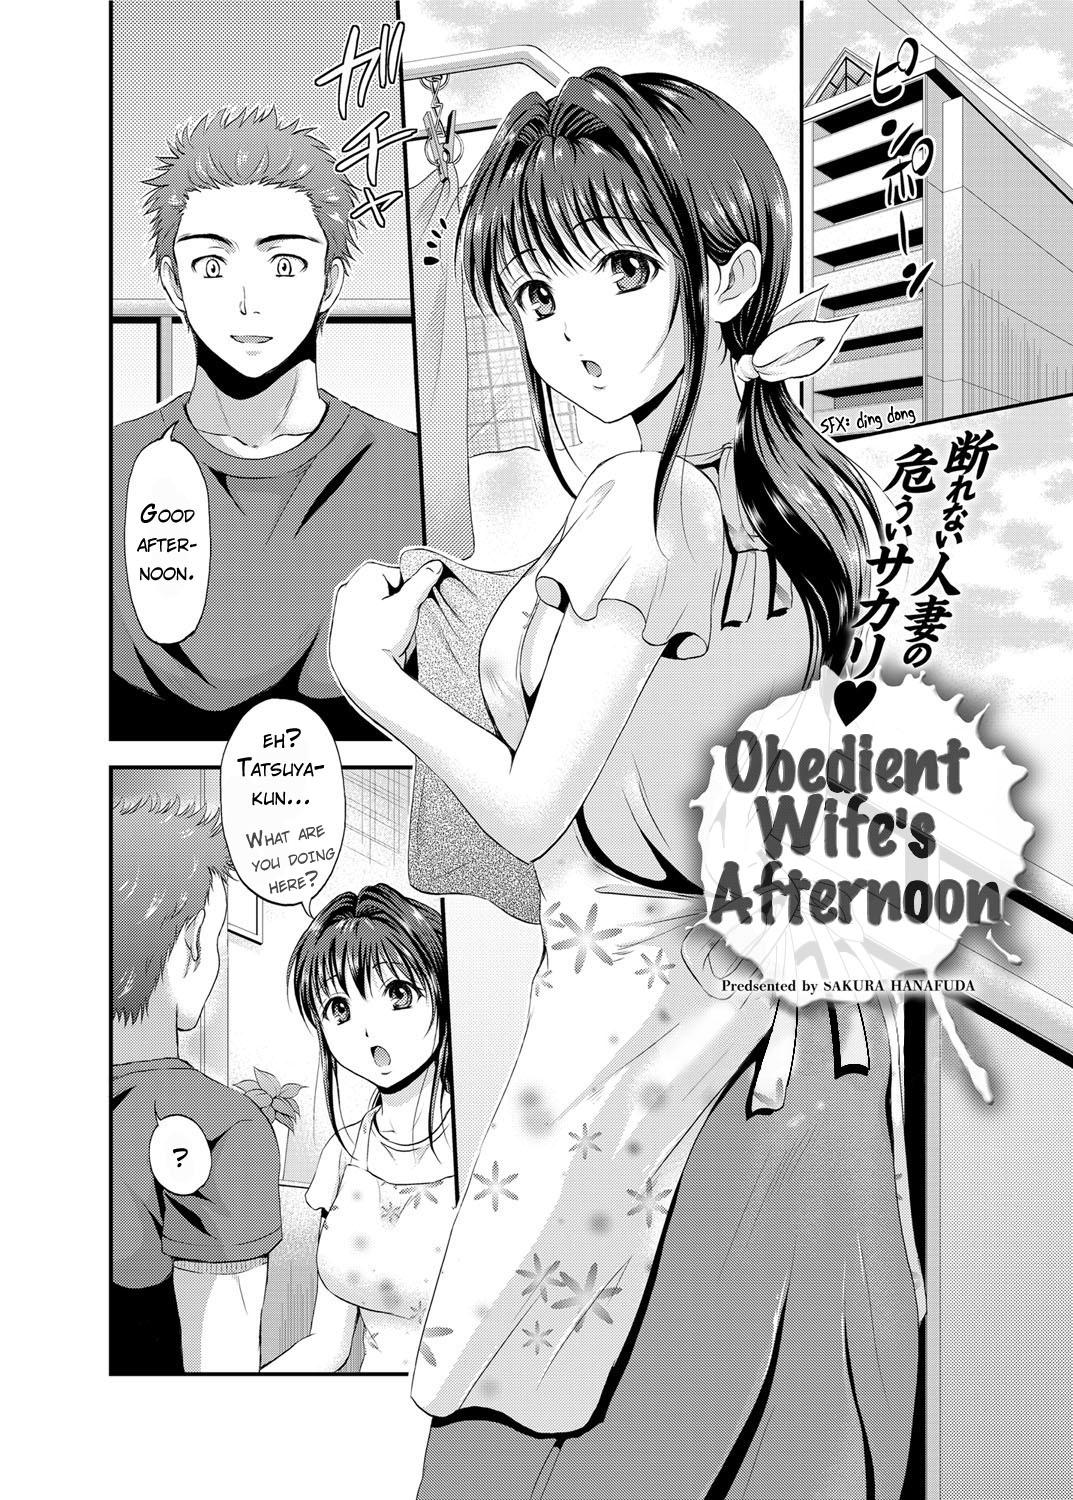 The Obedient Wife's Afternoon 1